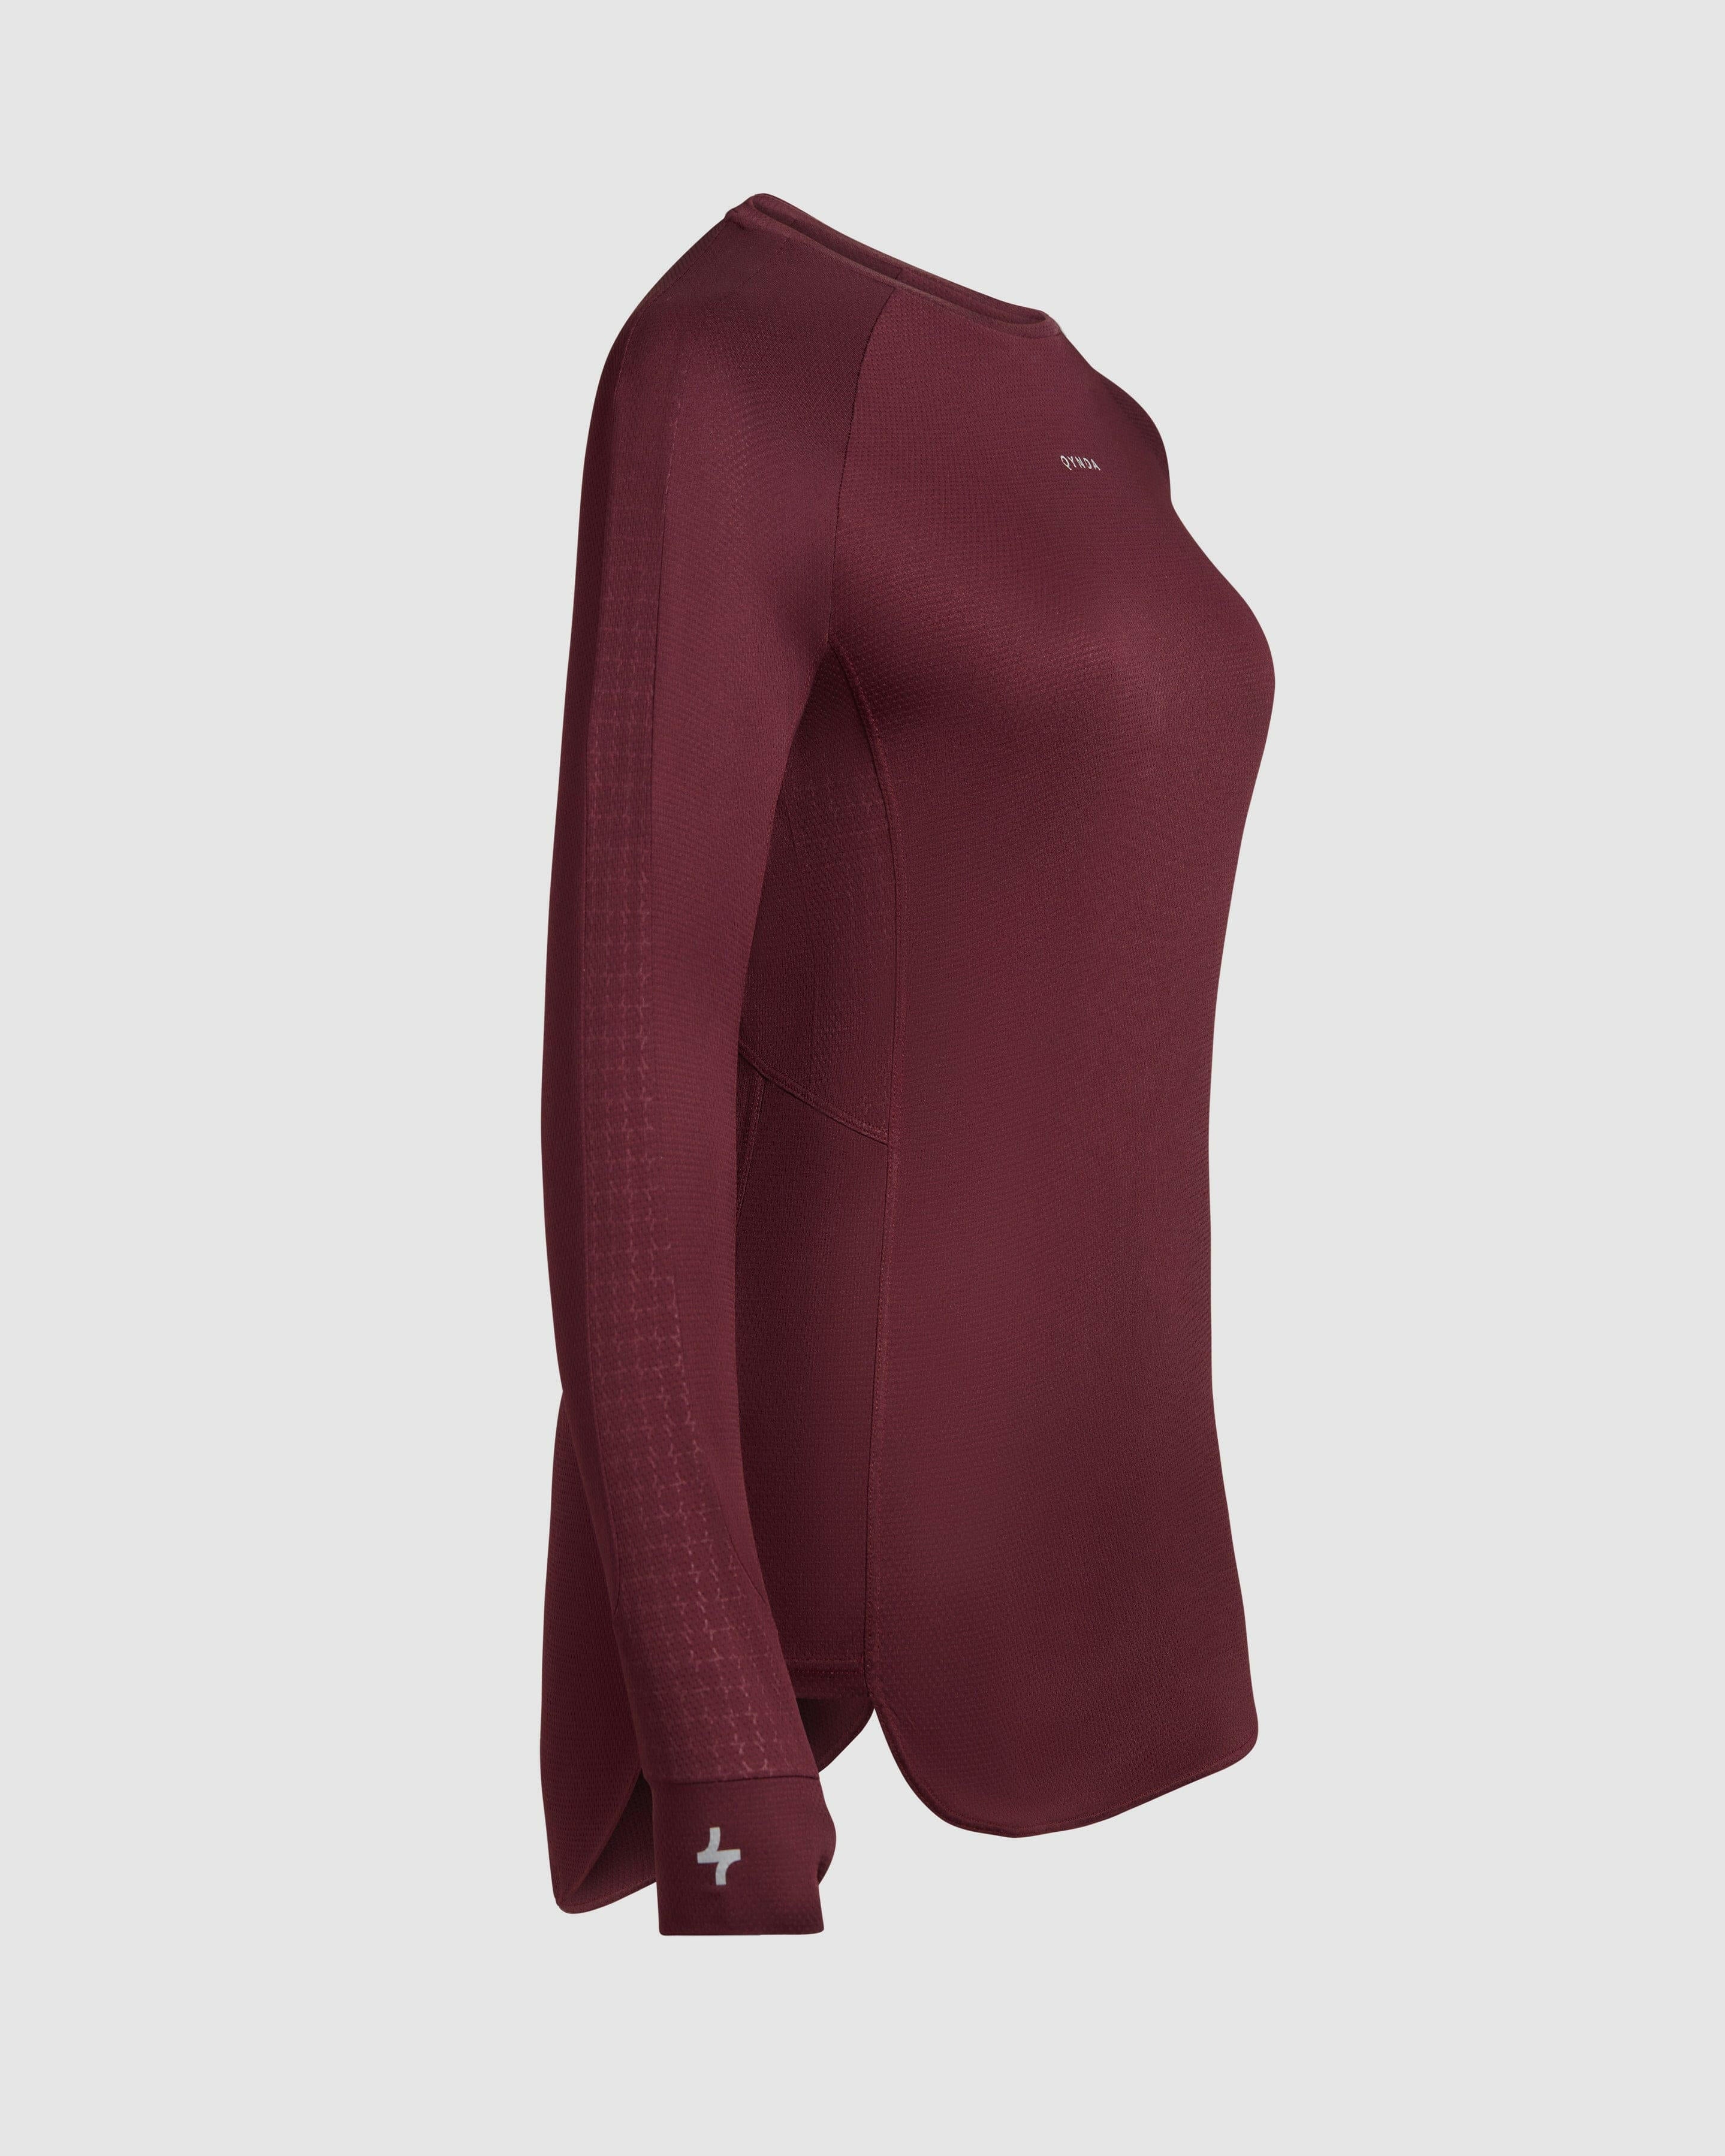 Side view of QYNDA ACT LONG SLEEVE T-SHIRT with a crew neck and moisture-wicking fabric displayed on an invisible mannequin against a neutral background.